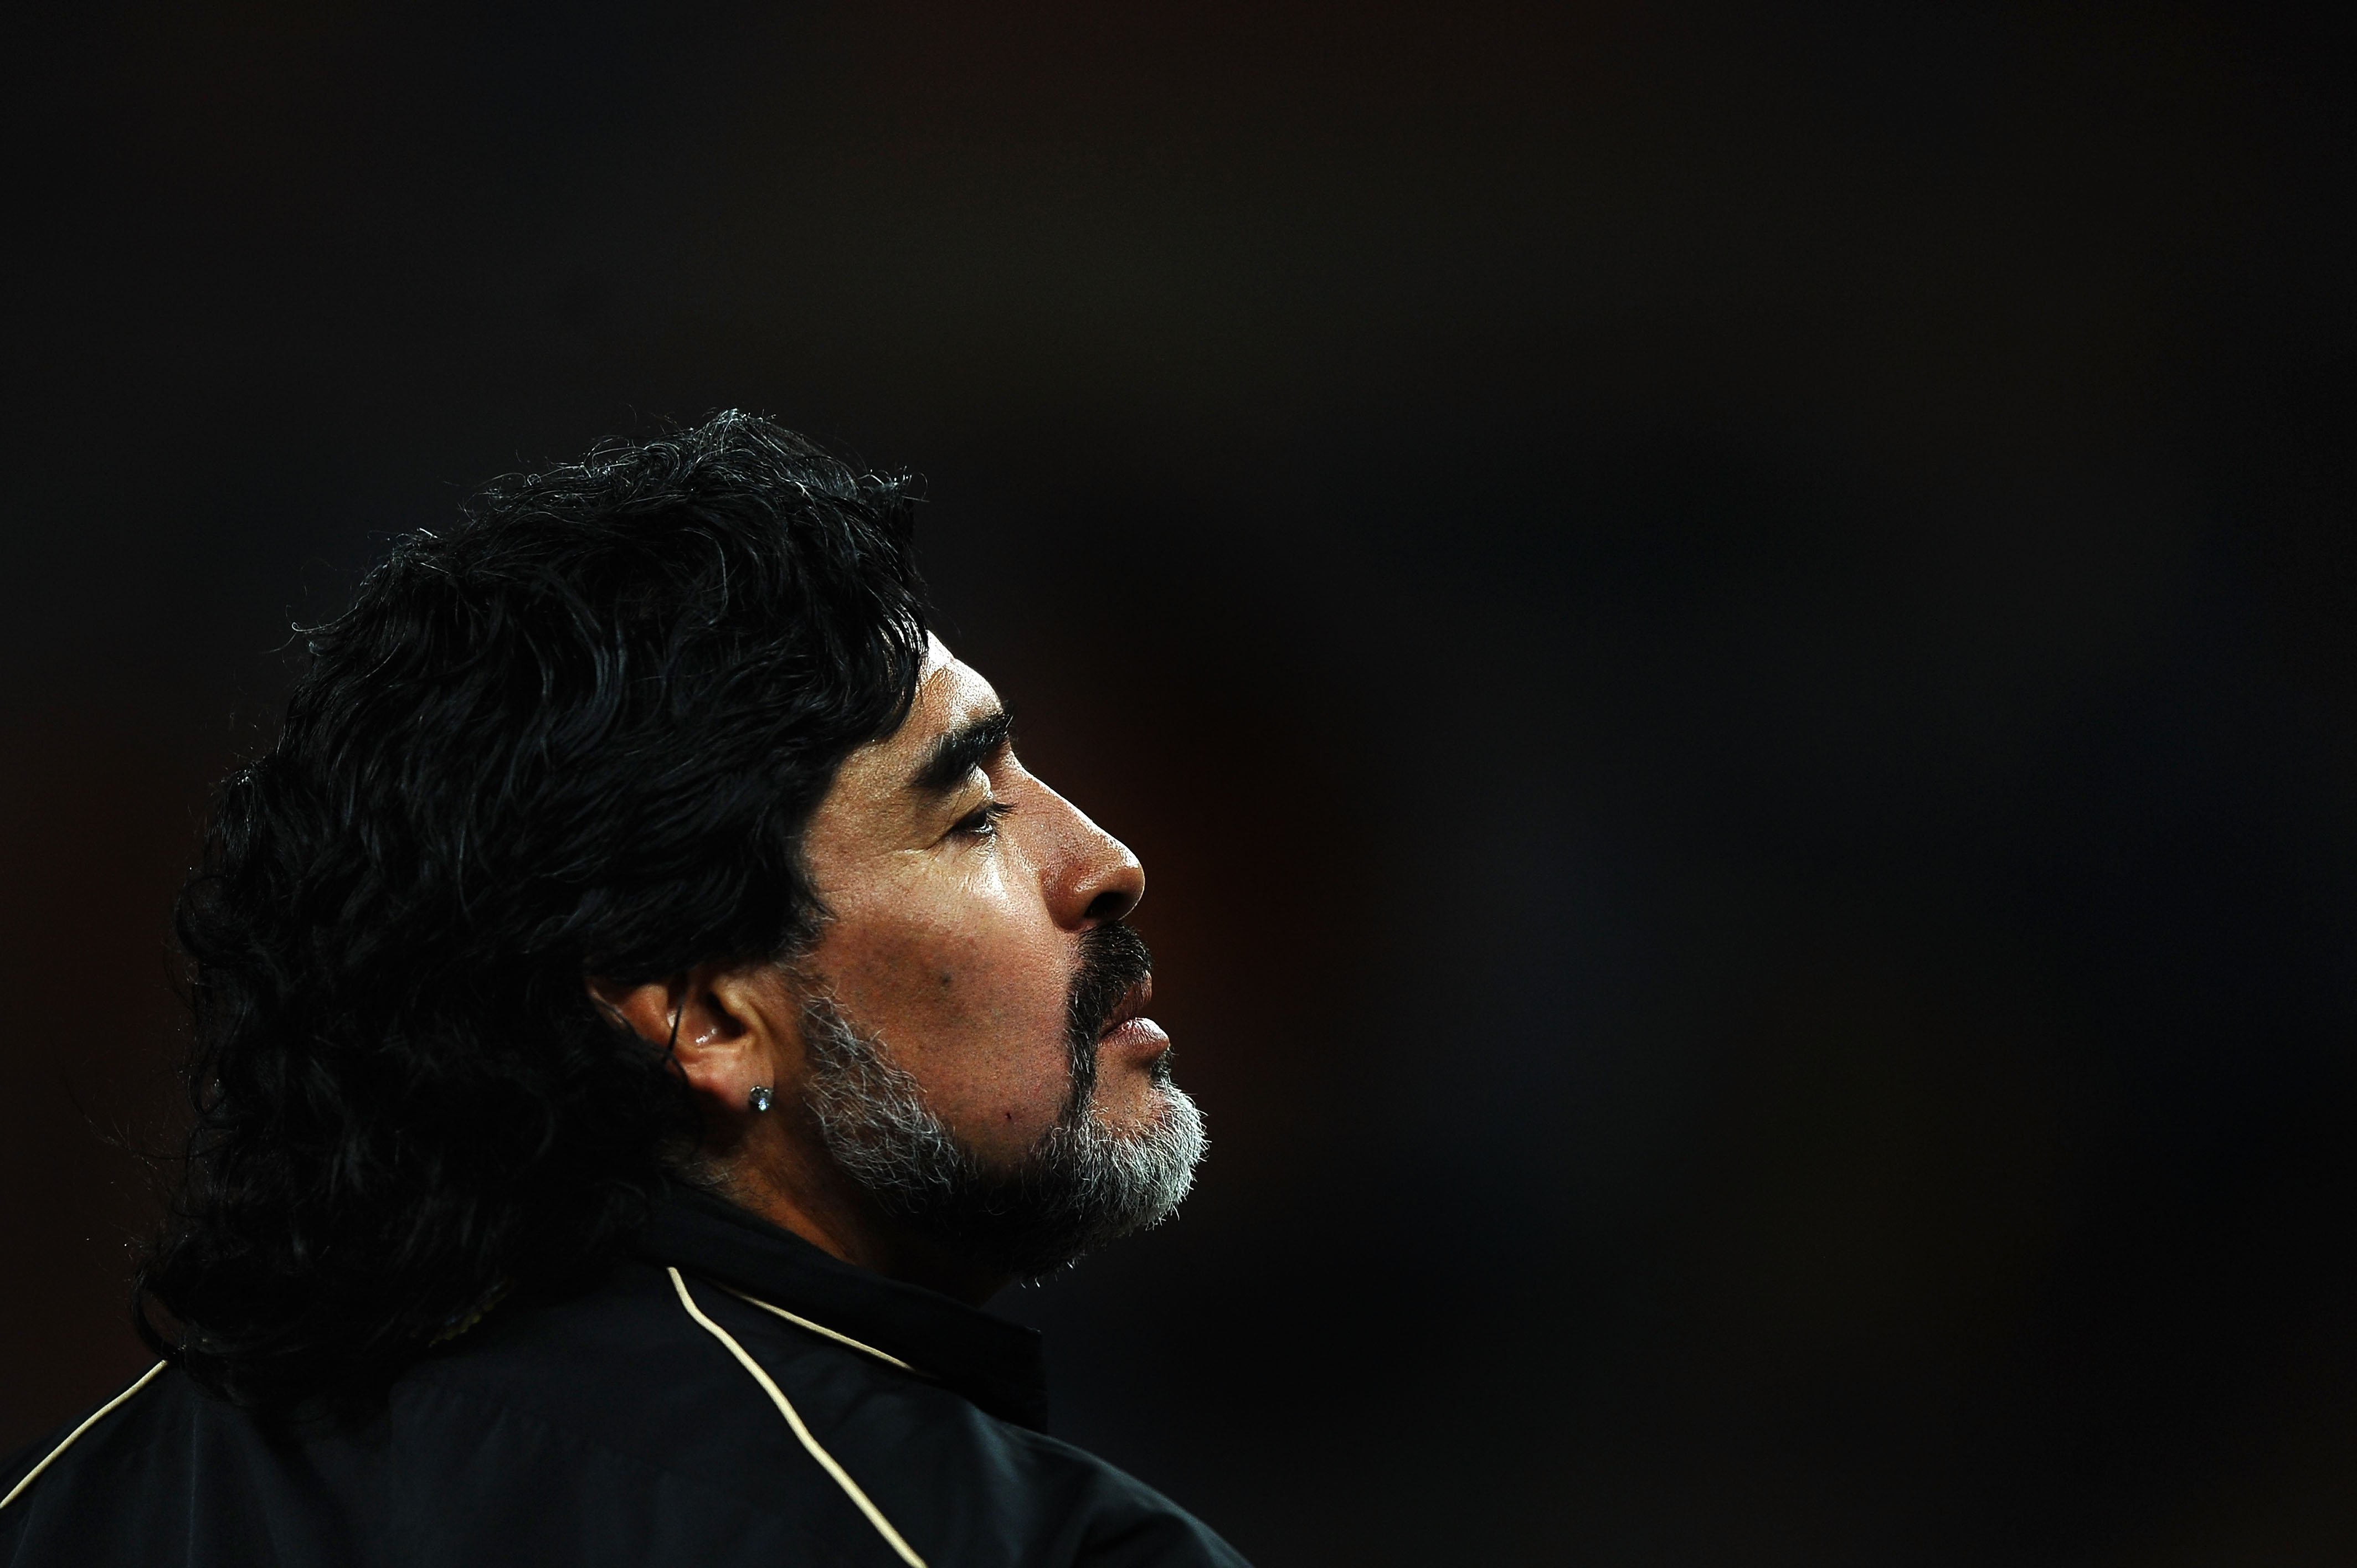 Diego Maradona at the 2010 FIFA World Cup South Africa Round of Sixteen match between Argentina and Mexico at Soccer City Stadium on June 27, 2010 in Johannesburg, South Africa. | Photo by Laurence Griffiths/Getty Images